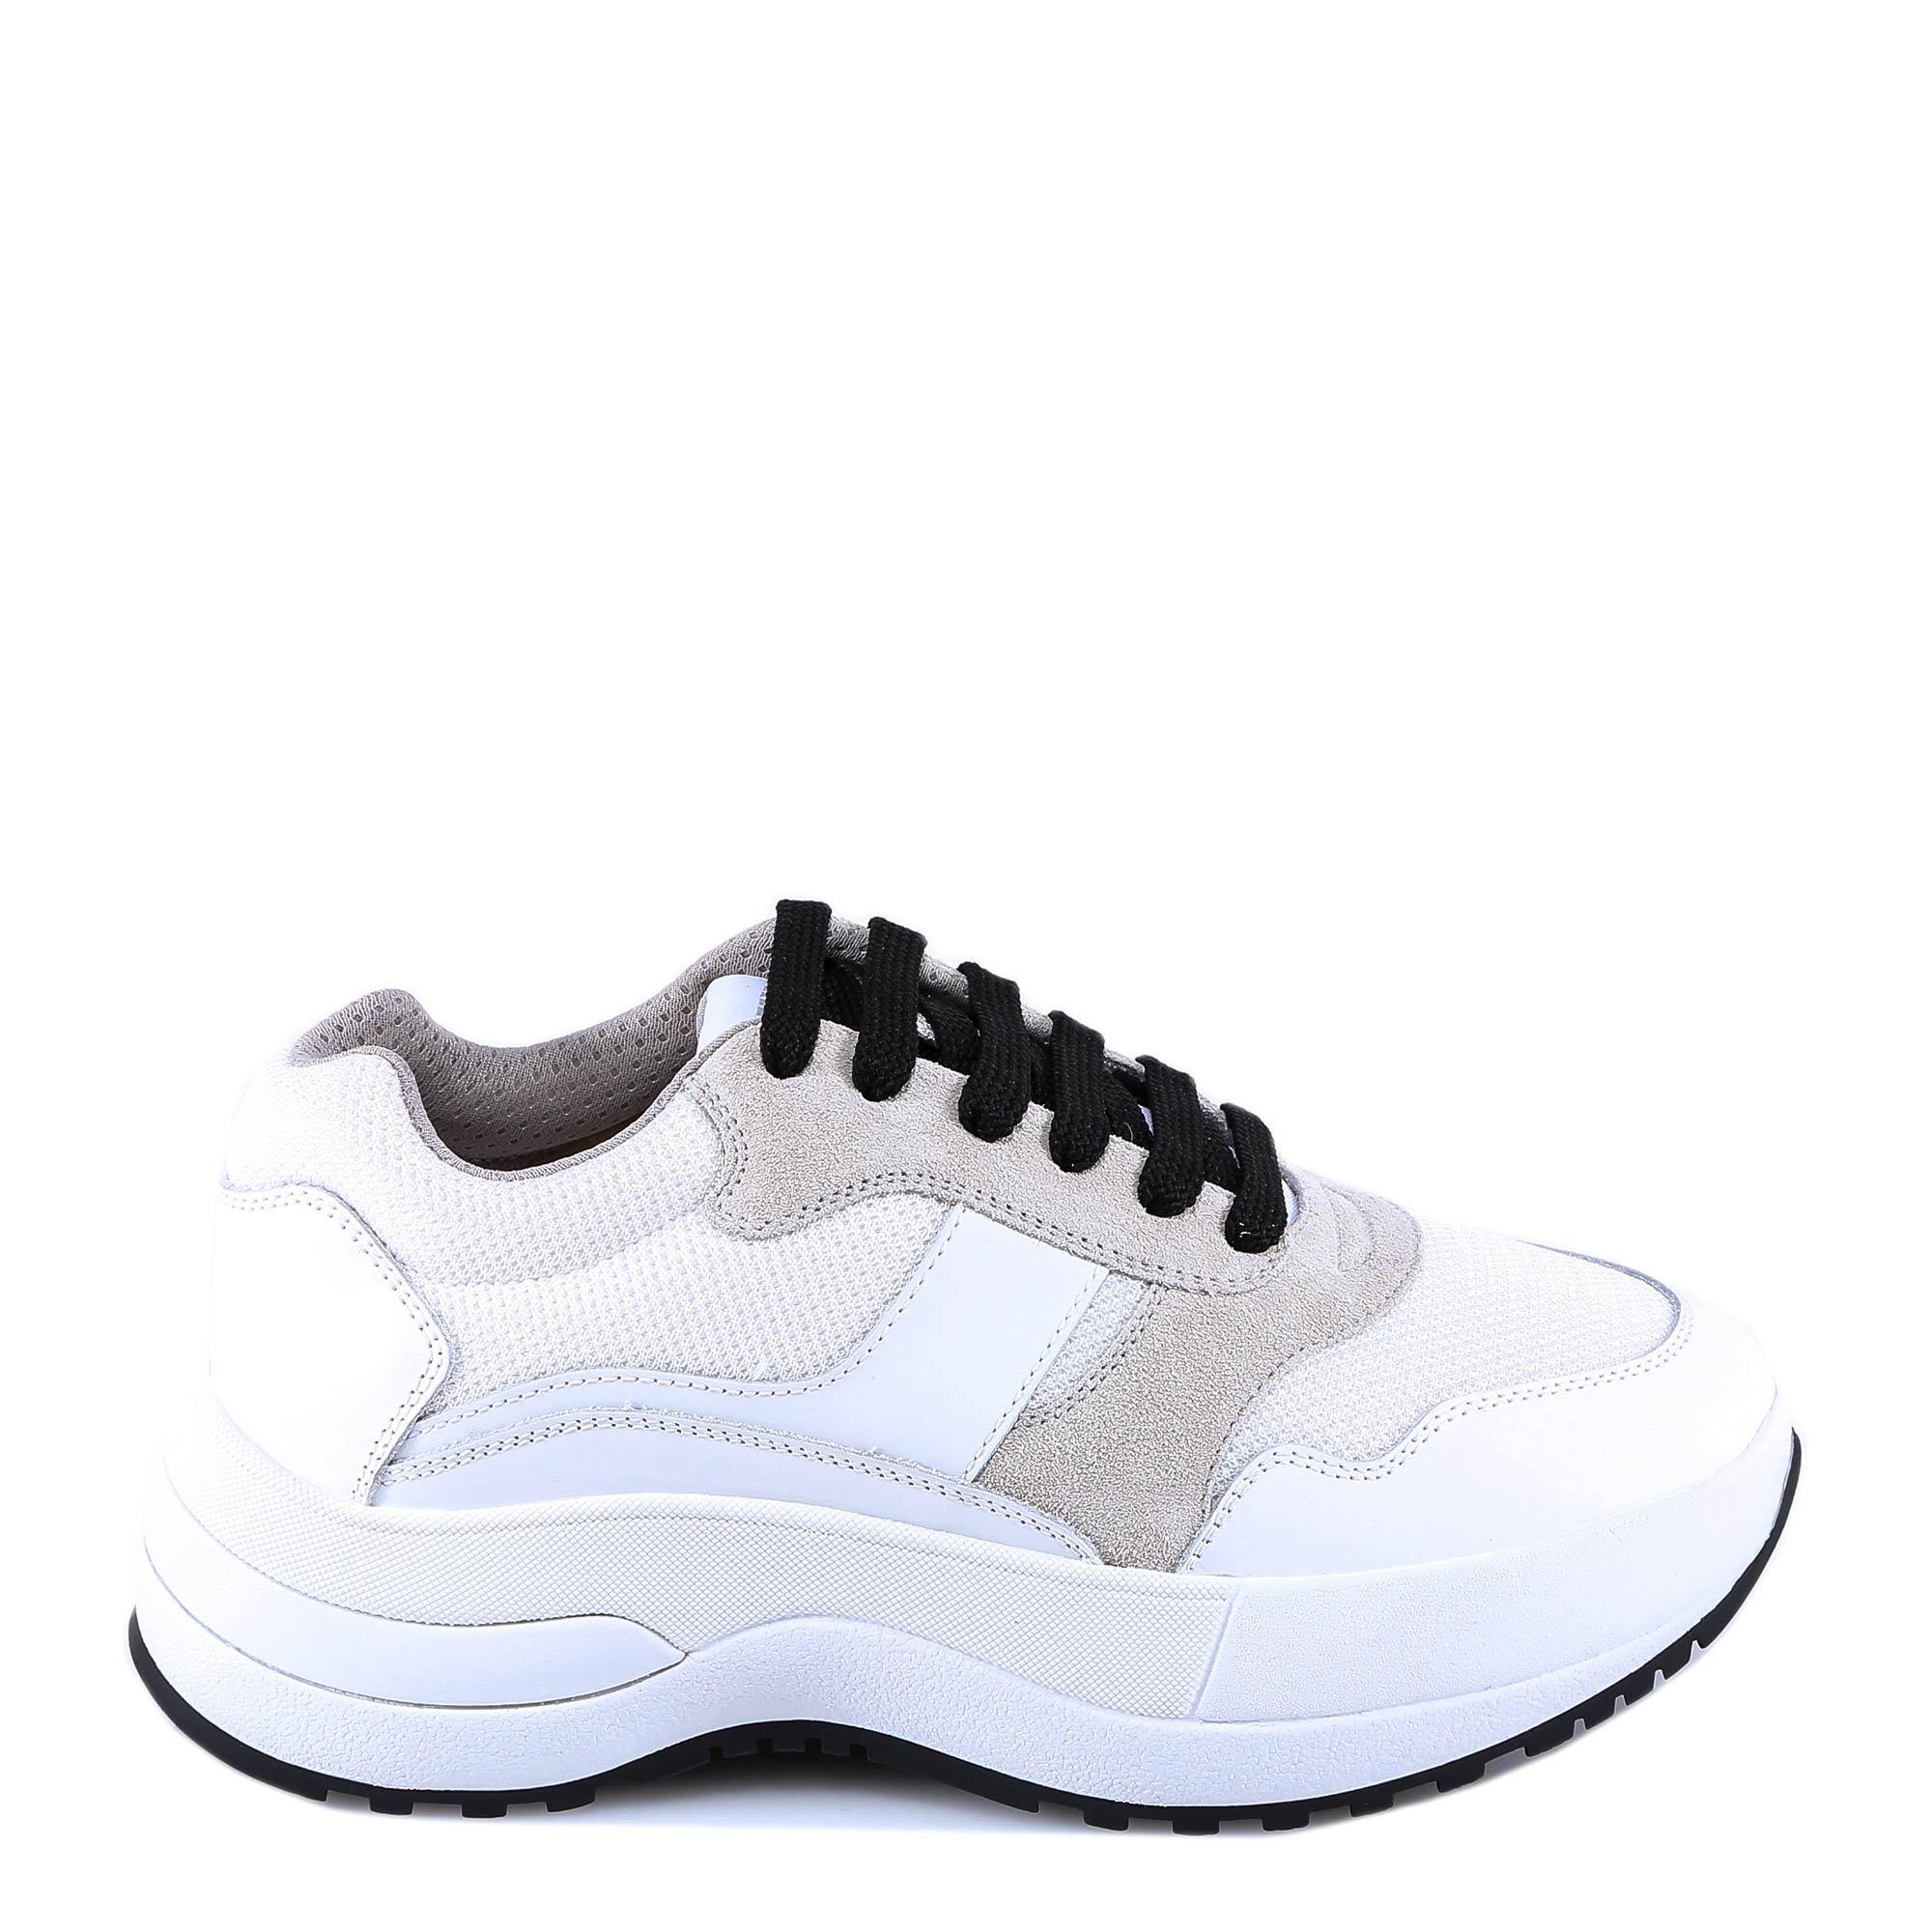 Celine Delivery Sneakers in White | Lyst